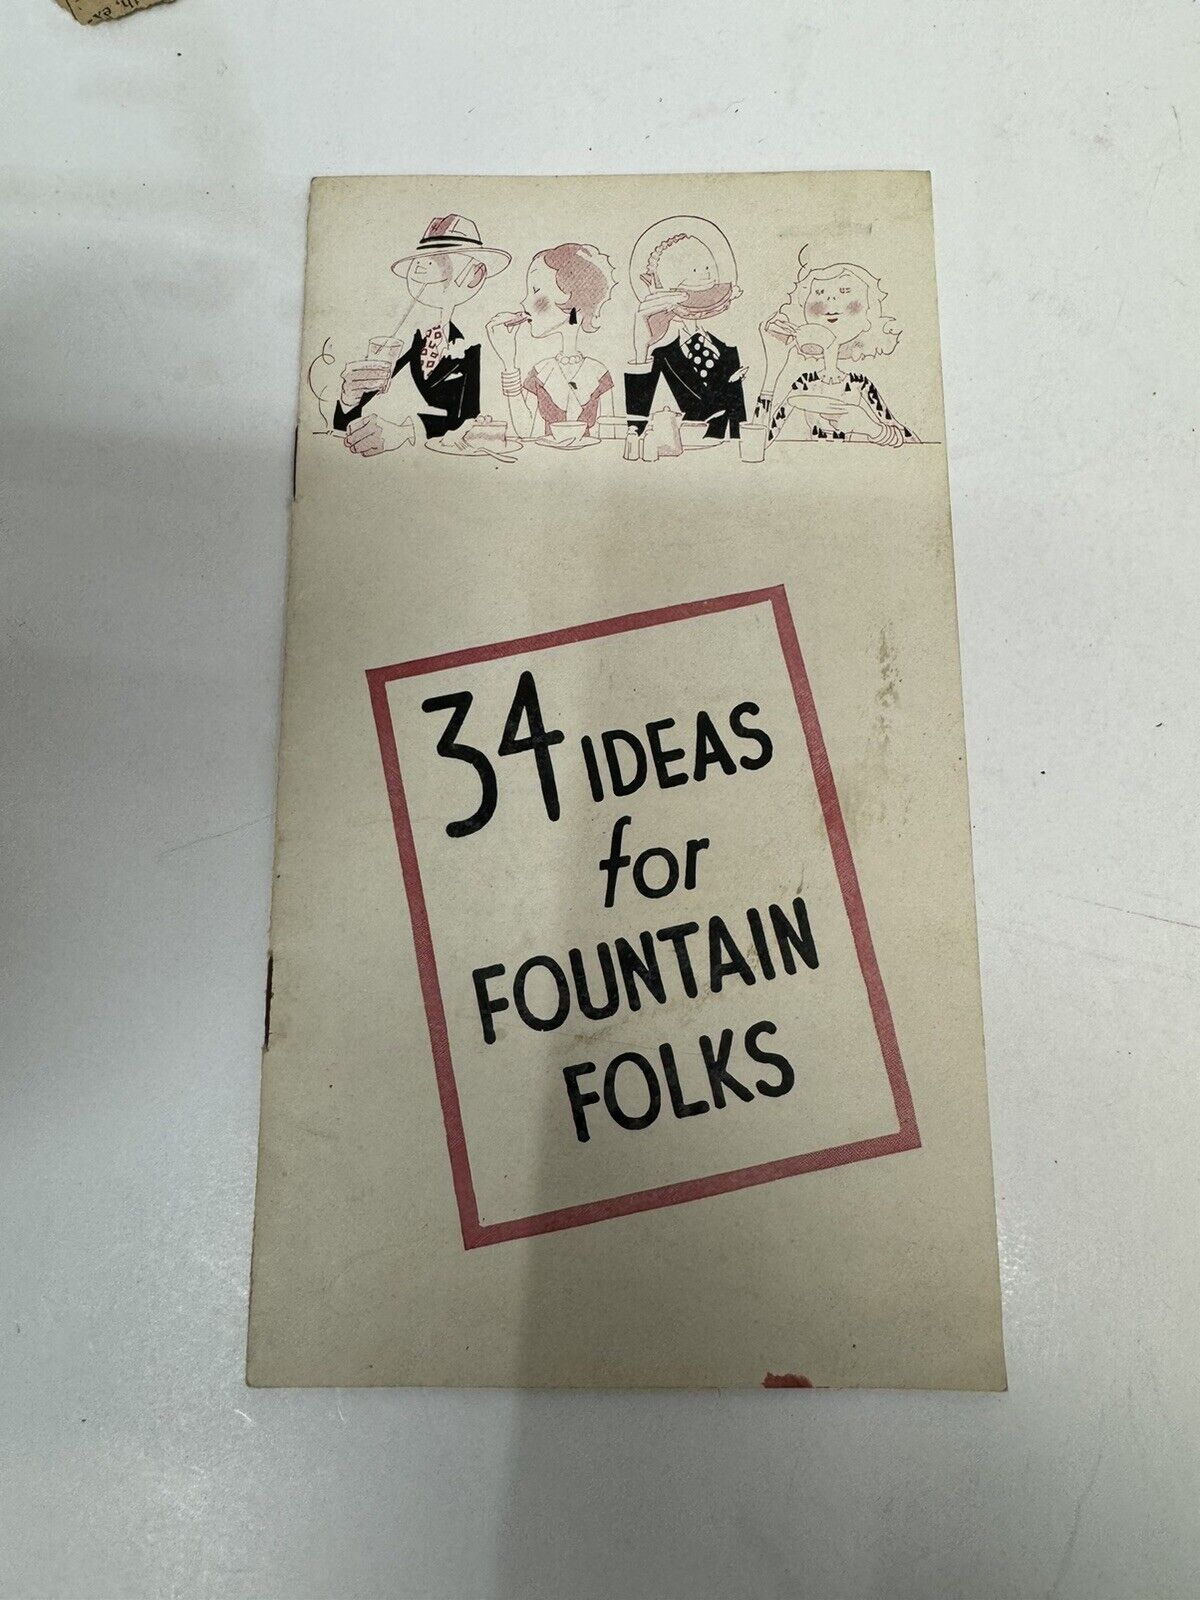 antique 34 ideas for fountain folks uneeda national biscuit company